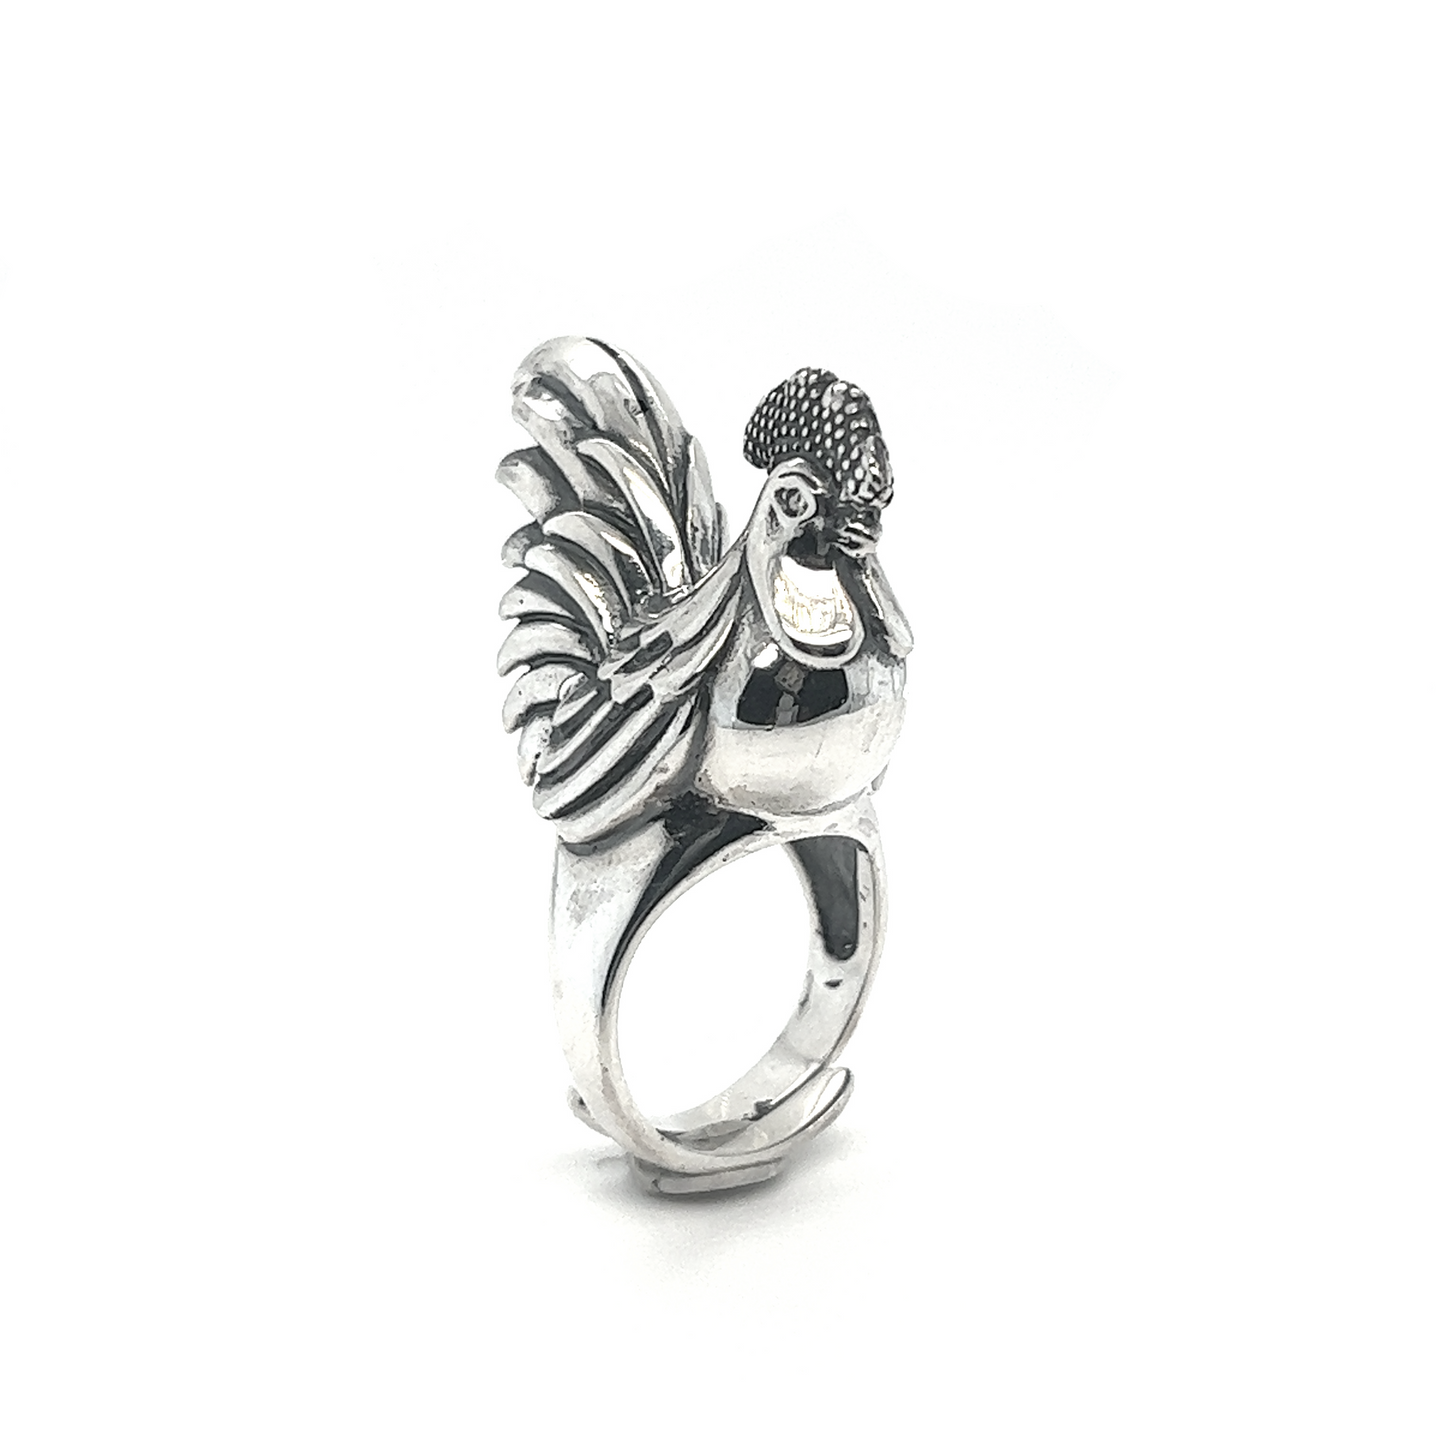 An Exceptional Rooster Ring.